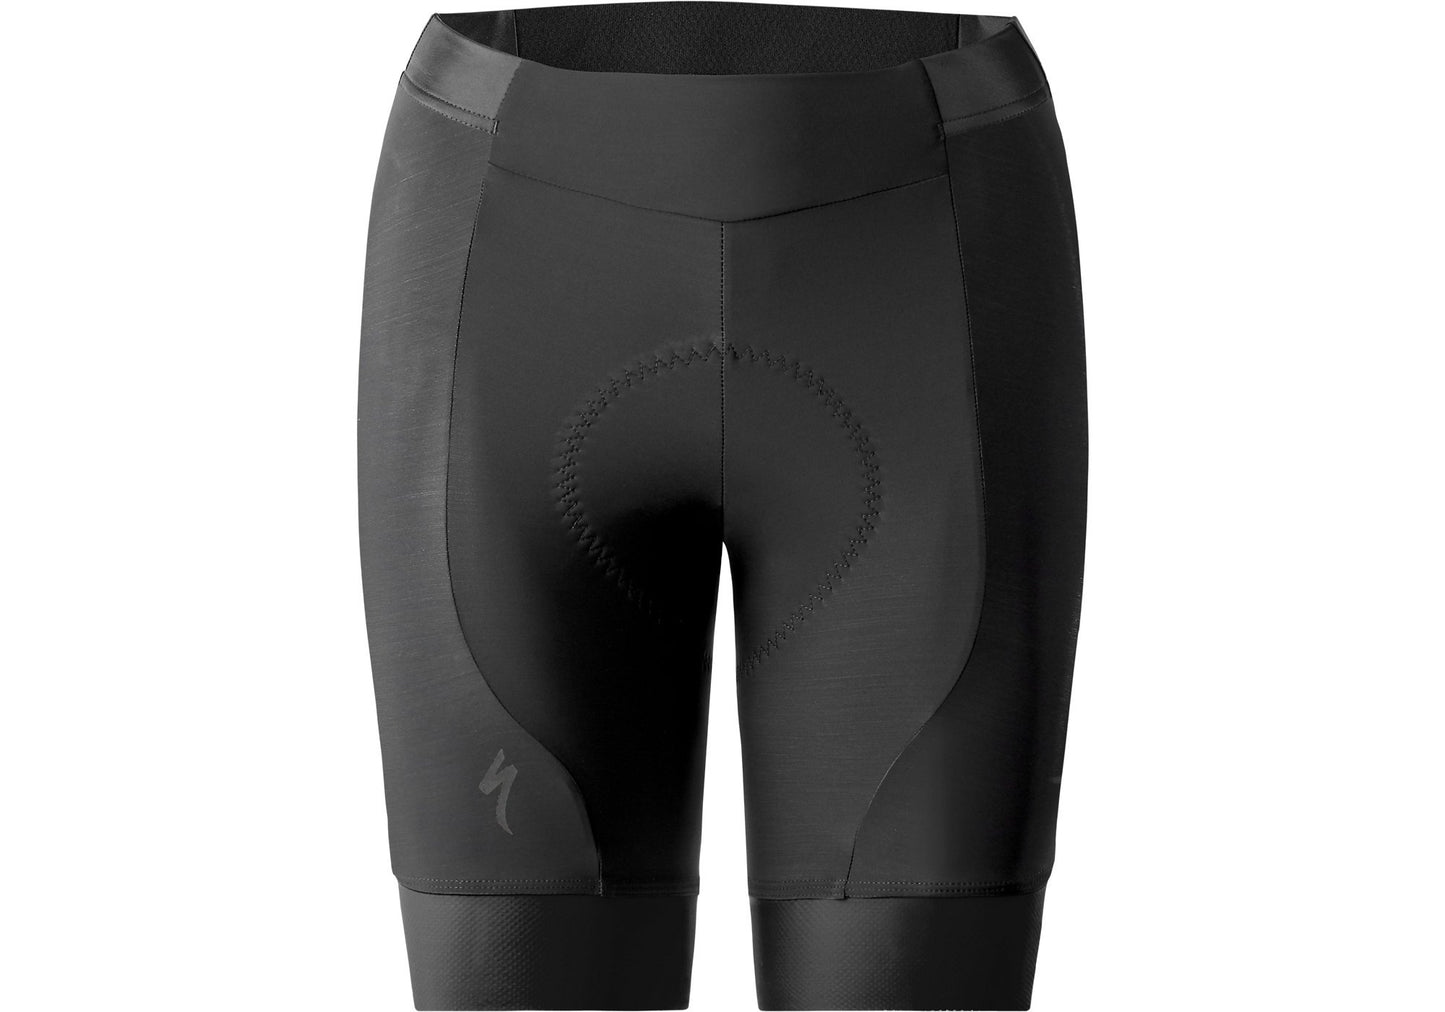 Specialized RBX Womens Shorts with SWAT